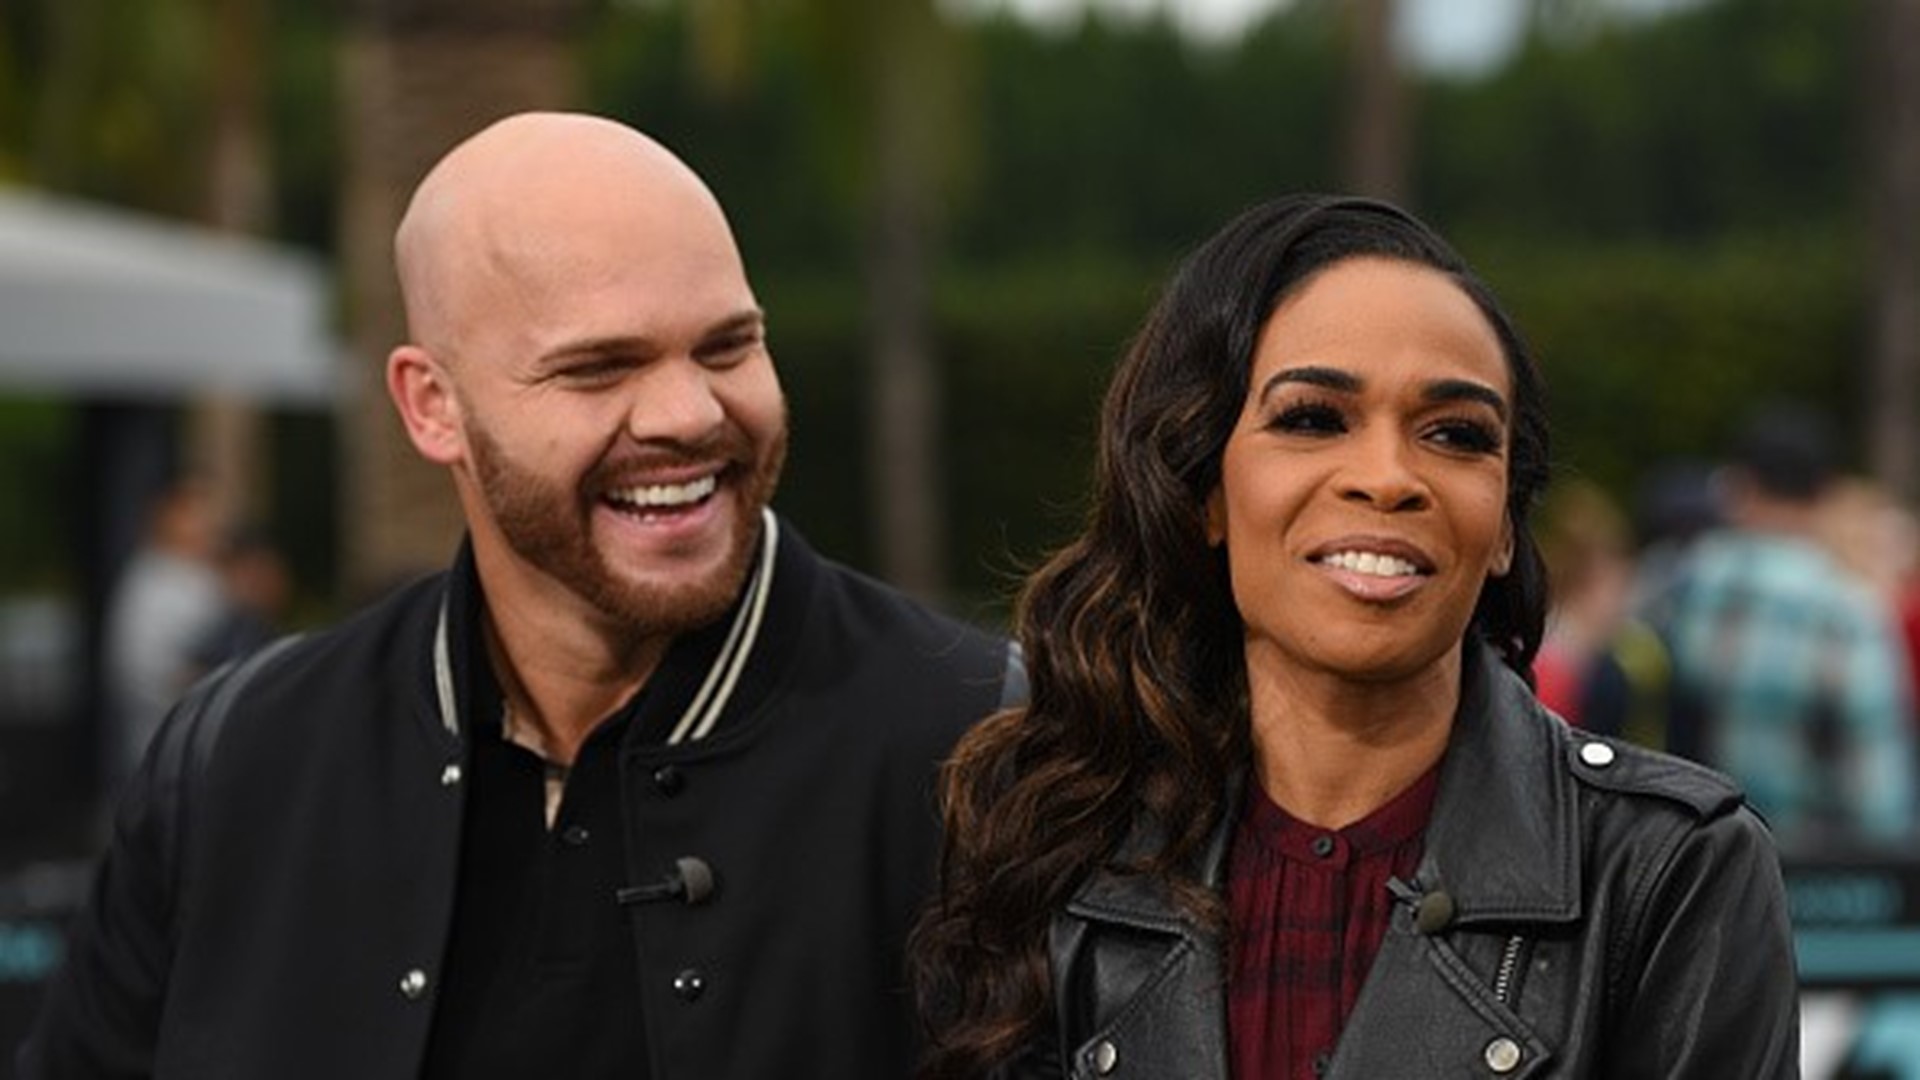 Michelle Williams' new show follows her through her engagement and new marriage.